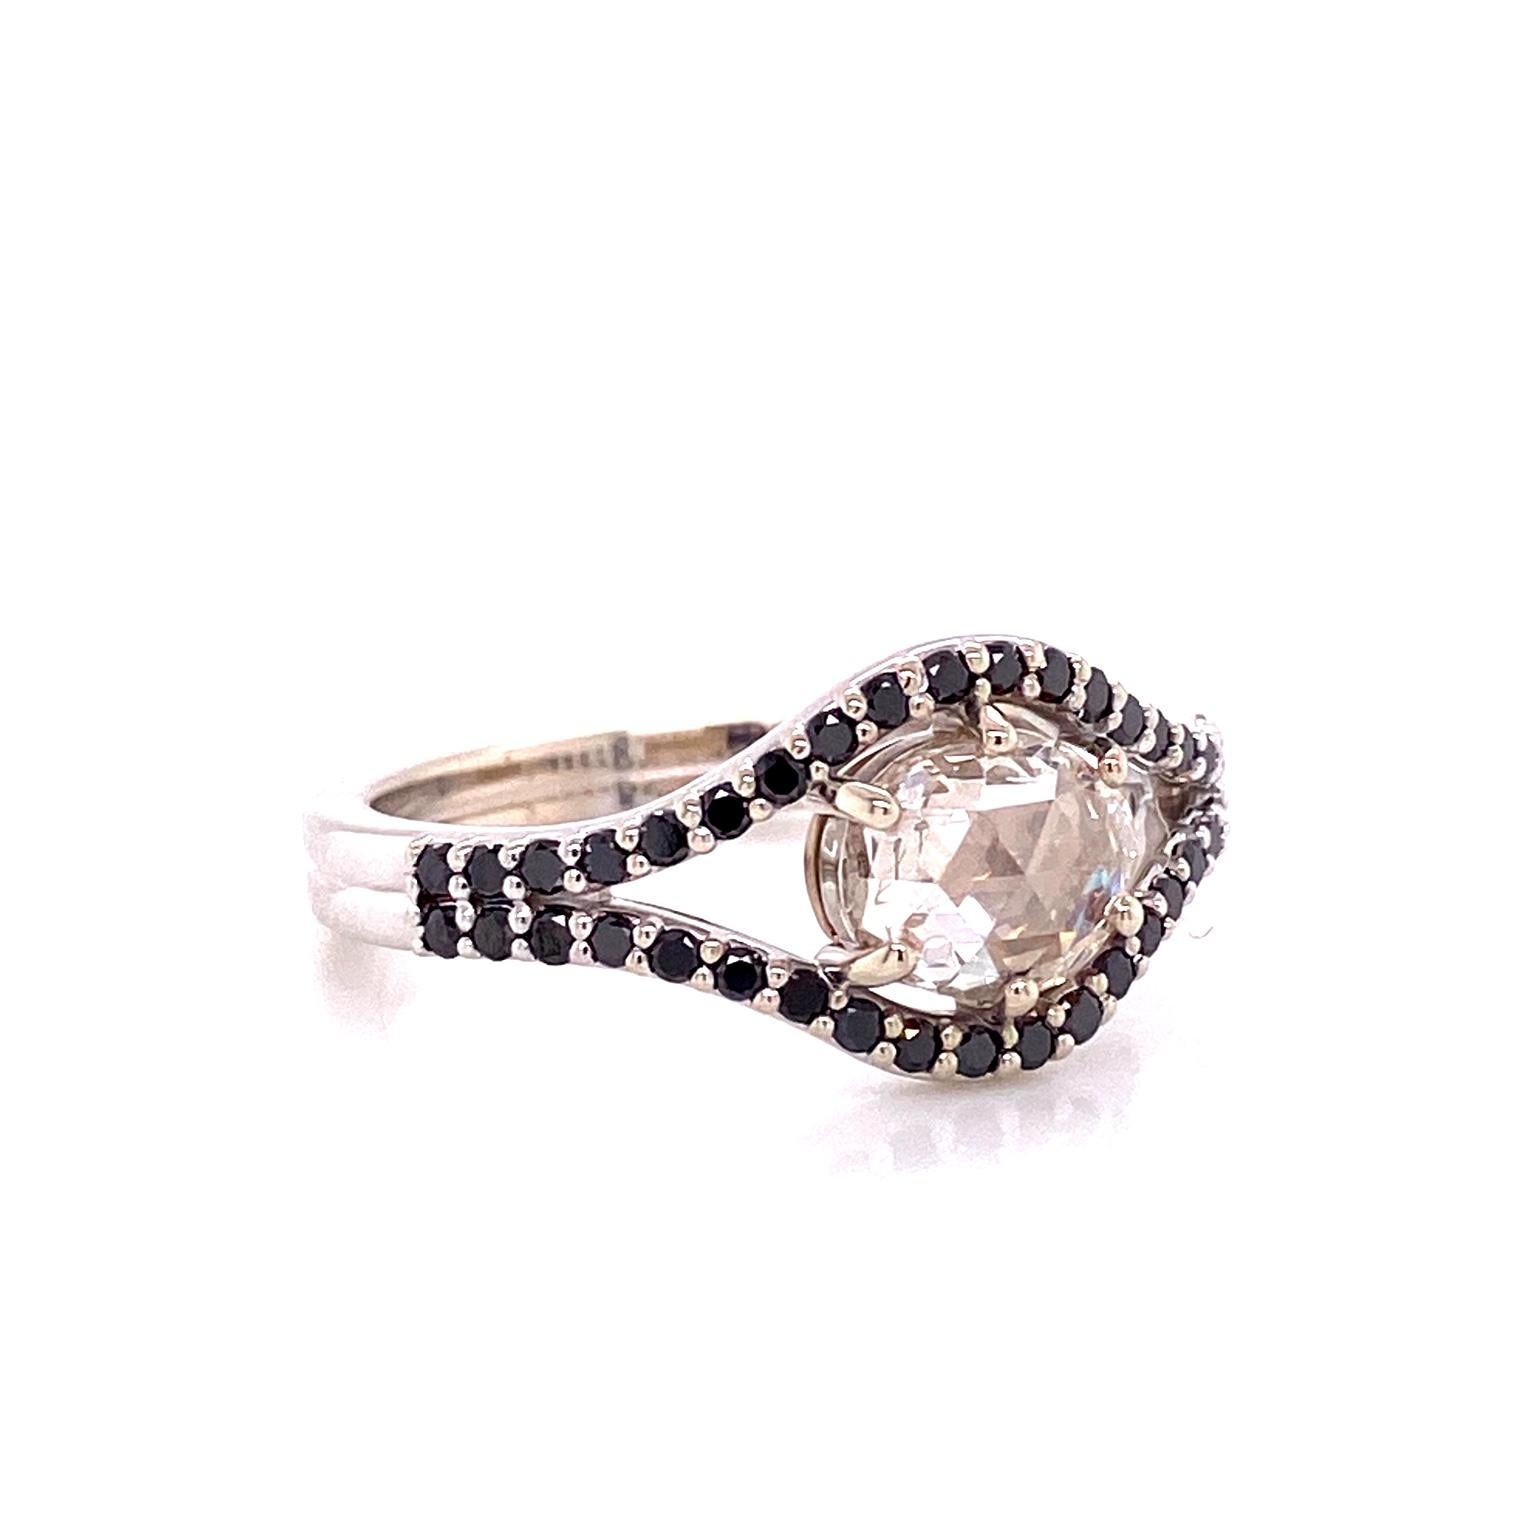 An 18k white gold ring featuring one prong set rose cut oval white diamond, 0.80 carats, and two surrounding rows of round full cut black diamonds, 0.28 total carat weight. Ring size 7. This ring was custom designed and made by llyn strong.